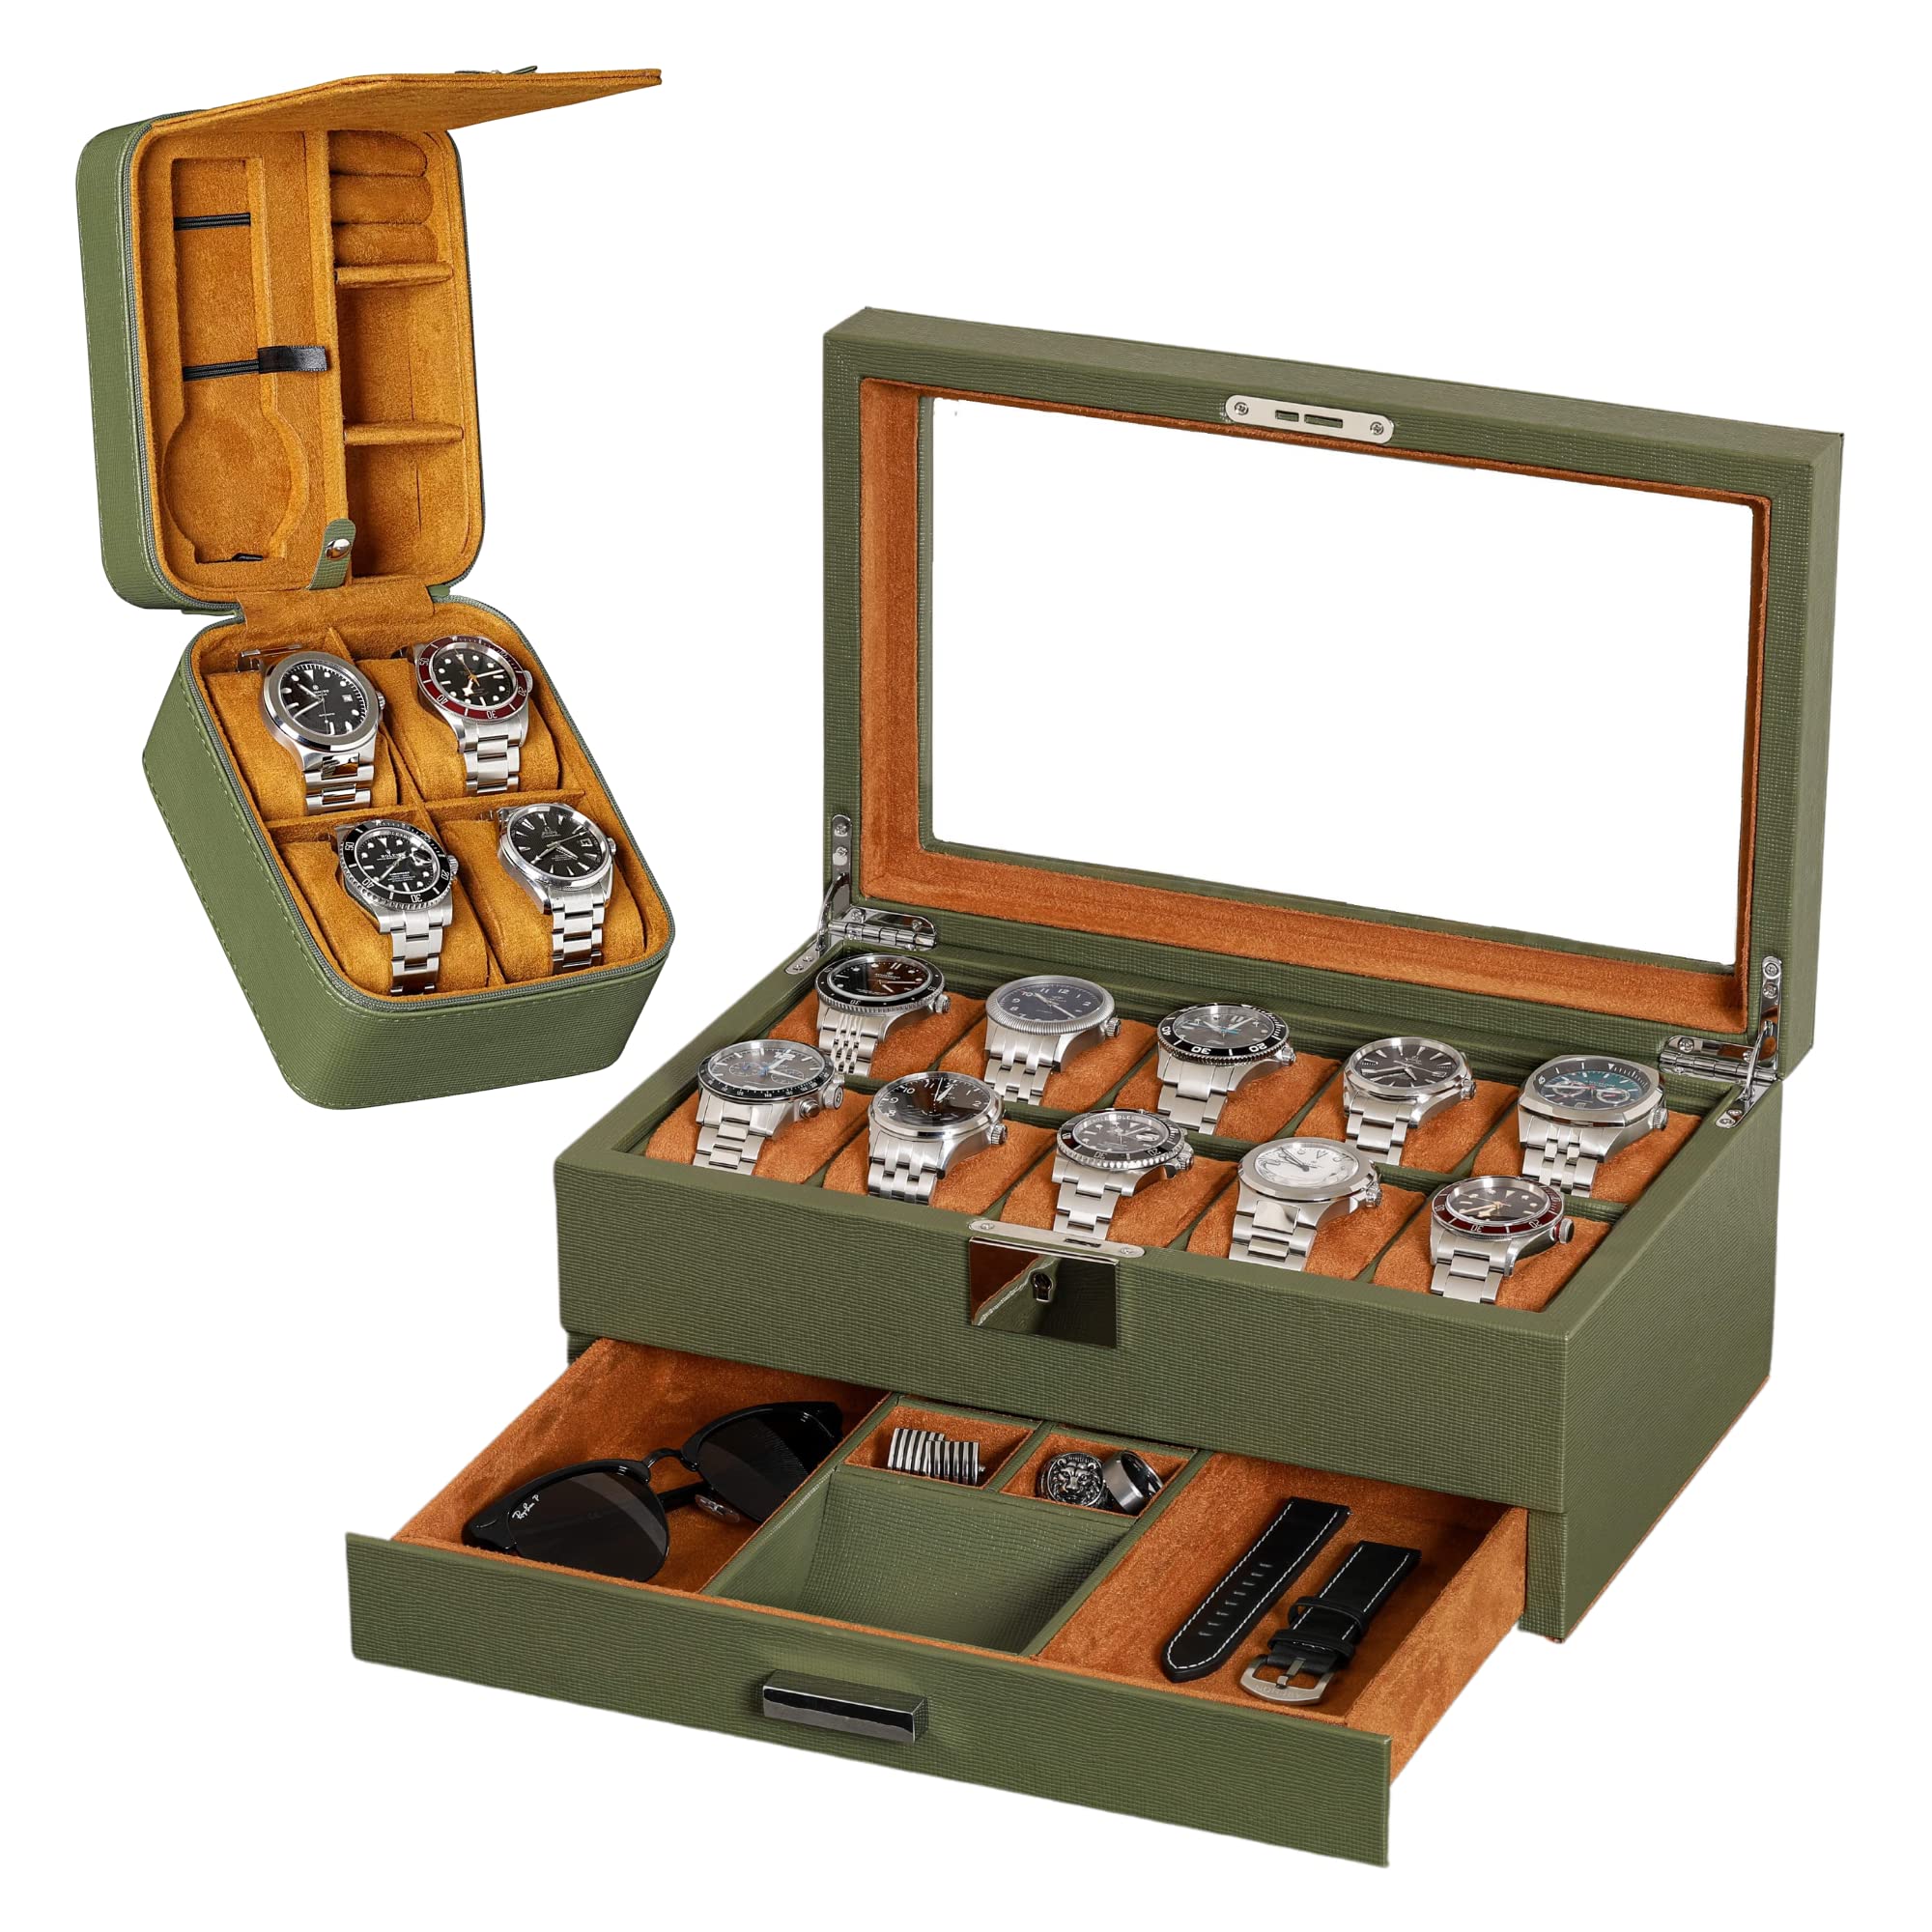 Gift Set 10 Slot Leather Watch Box with Valet Drawer & Matching 5 Watch Travel Case - Luxury Watch Case Display Organizer, Locking Mens Jewelry Watches Holder, Men's Storage Boxes Glass Top Green/Tan